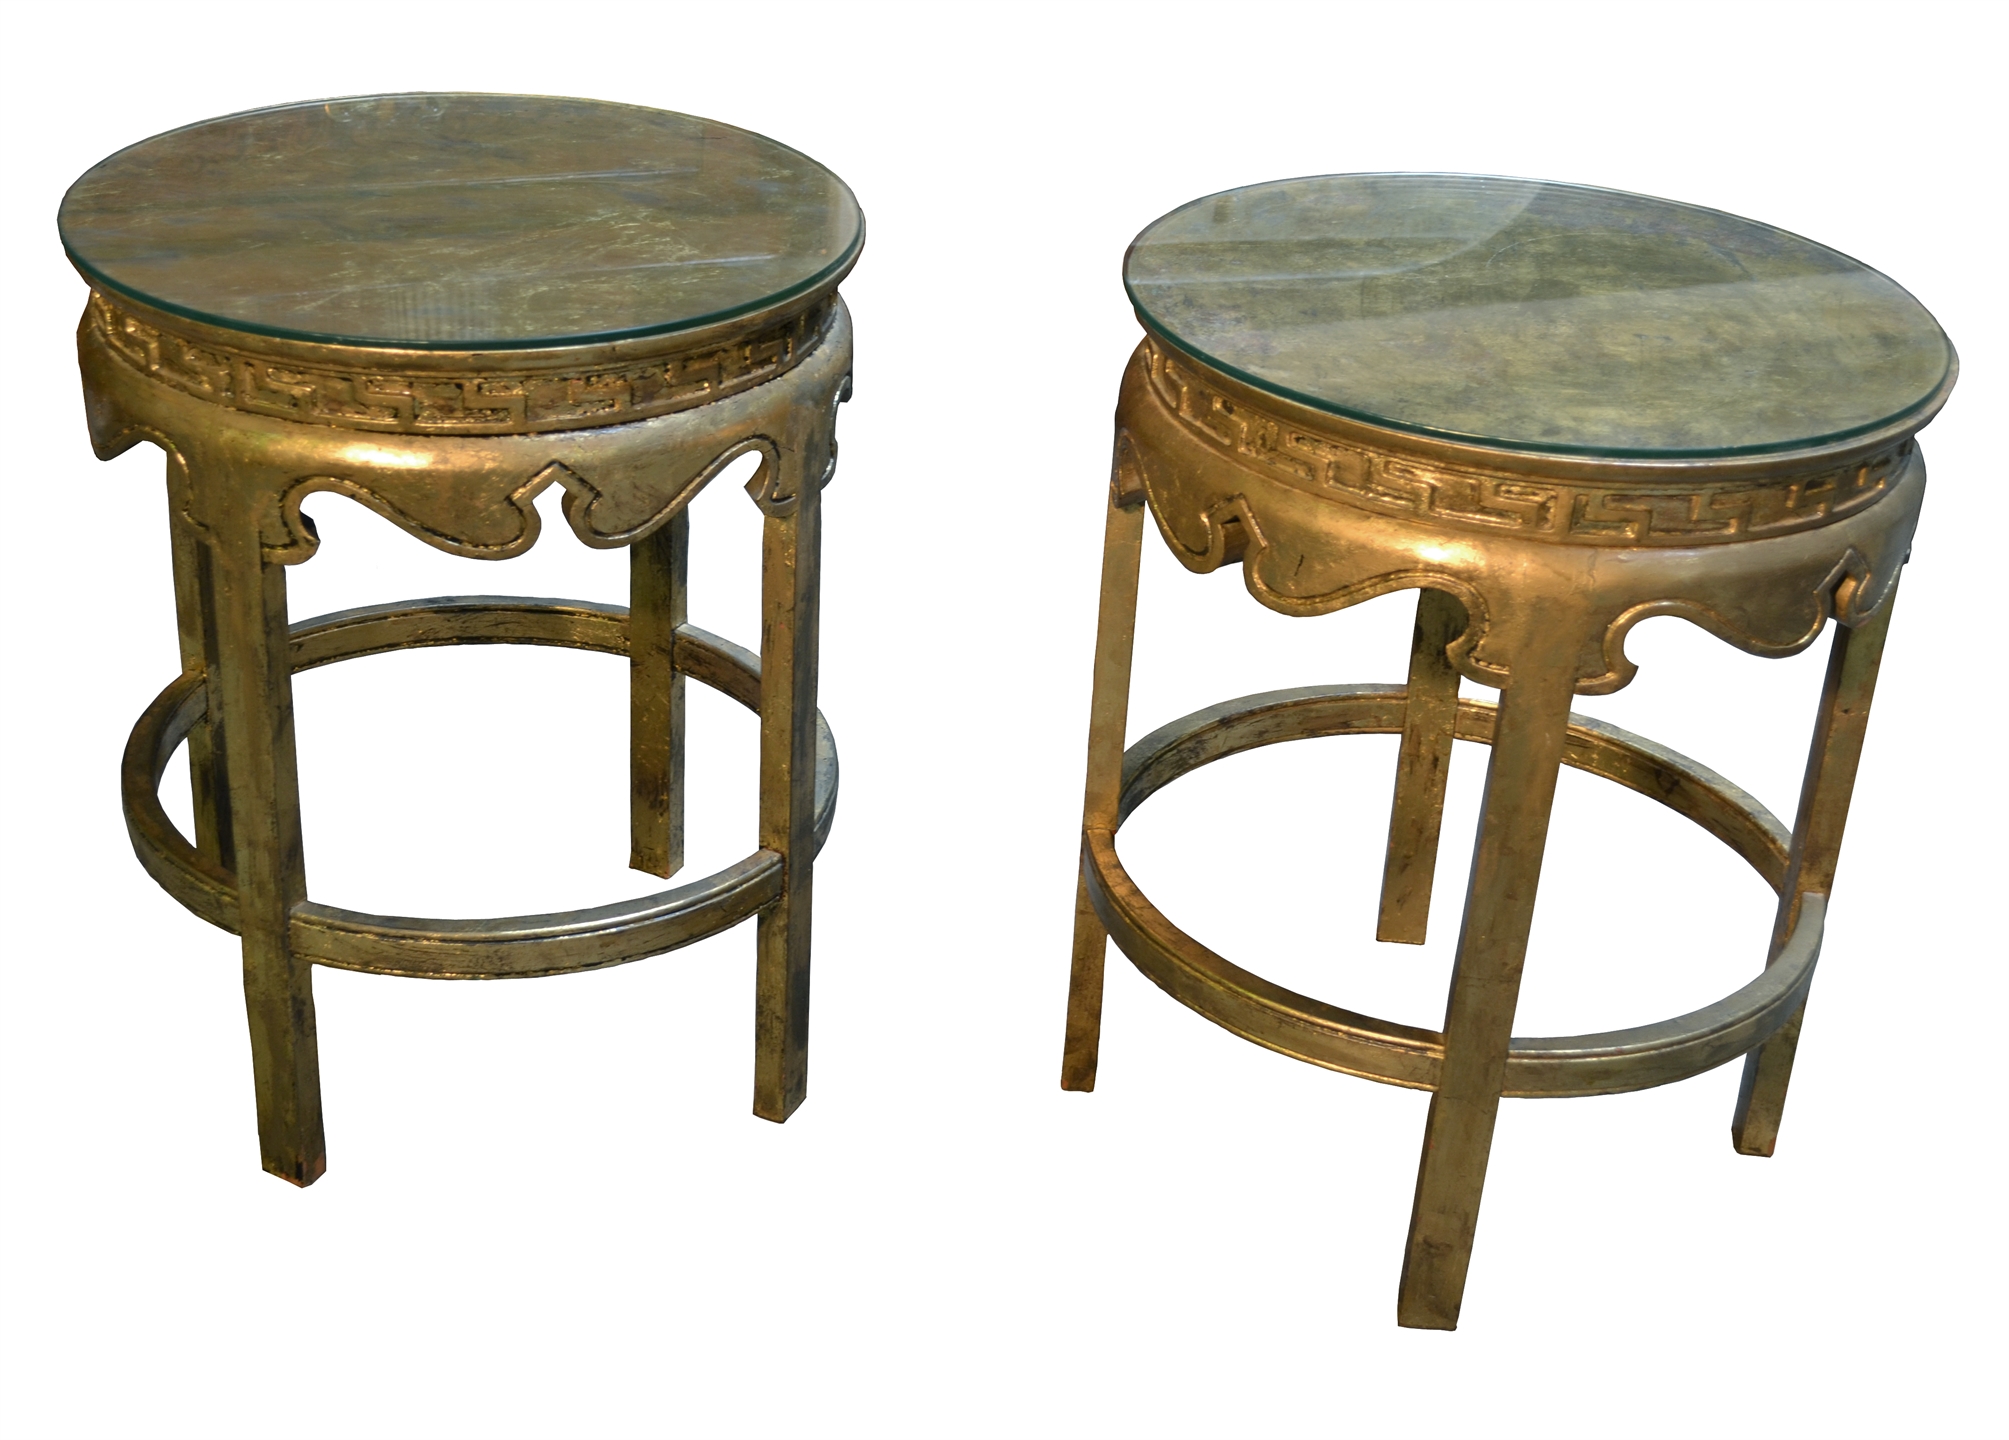 mb/3034 - Pair of Gilt Tables